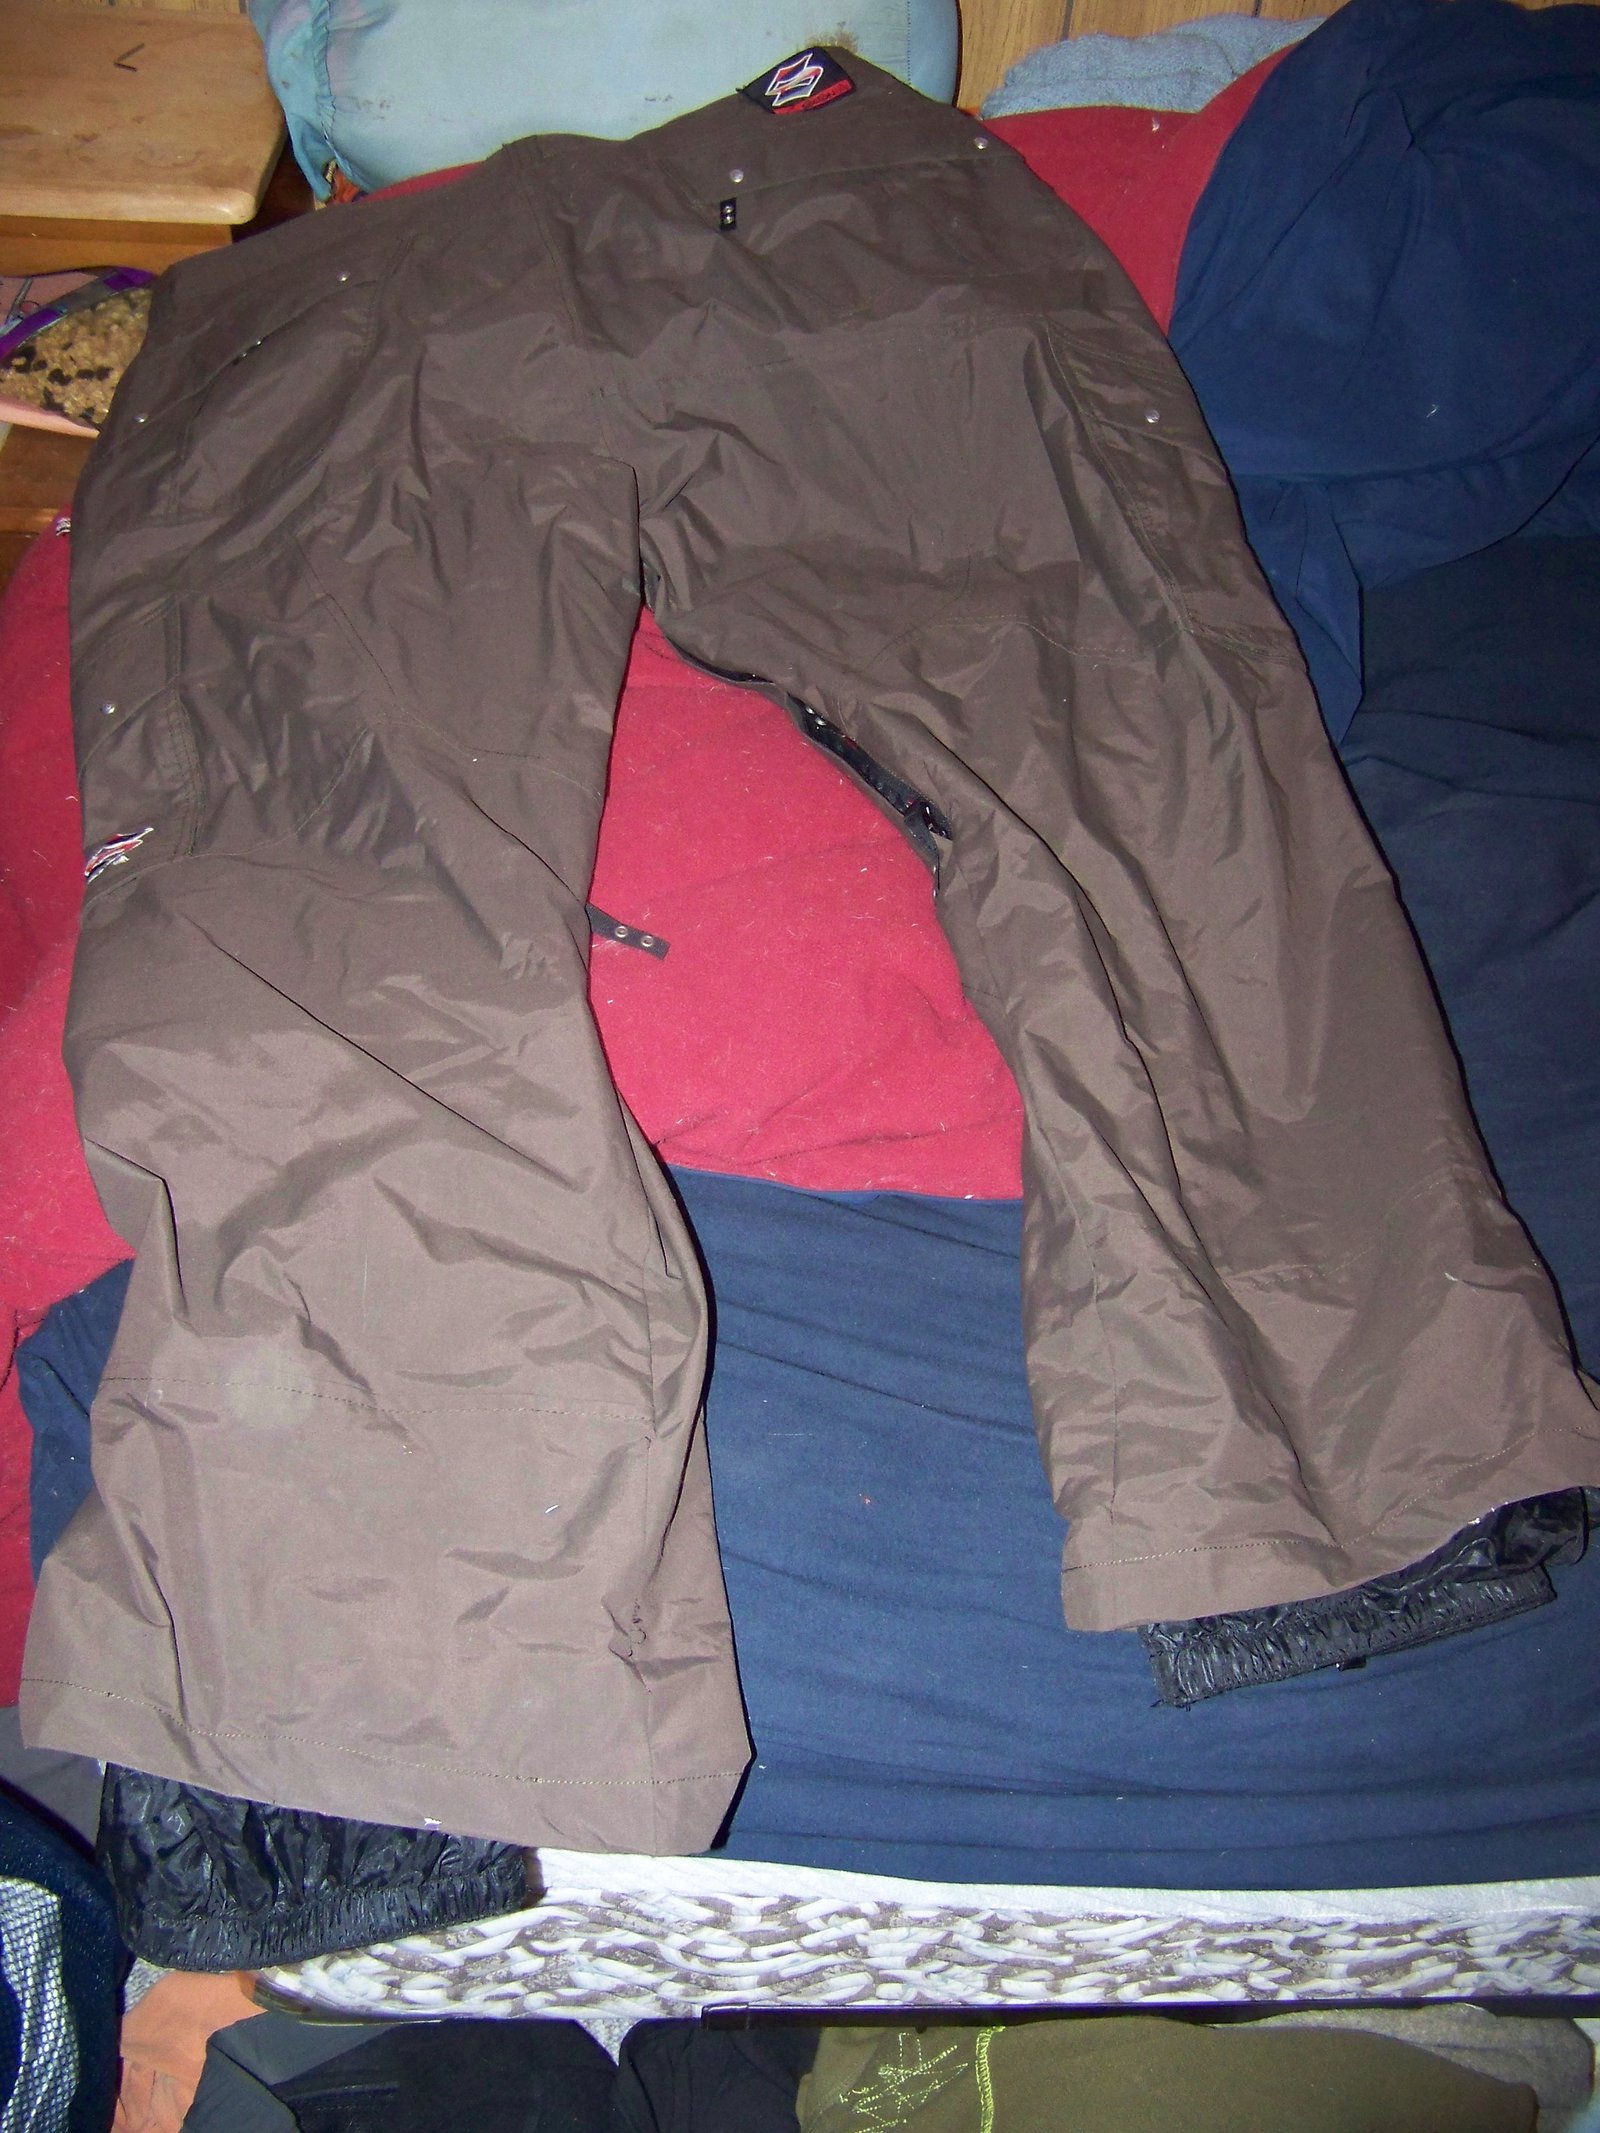 Section pants